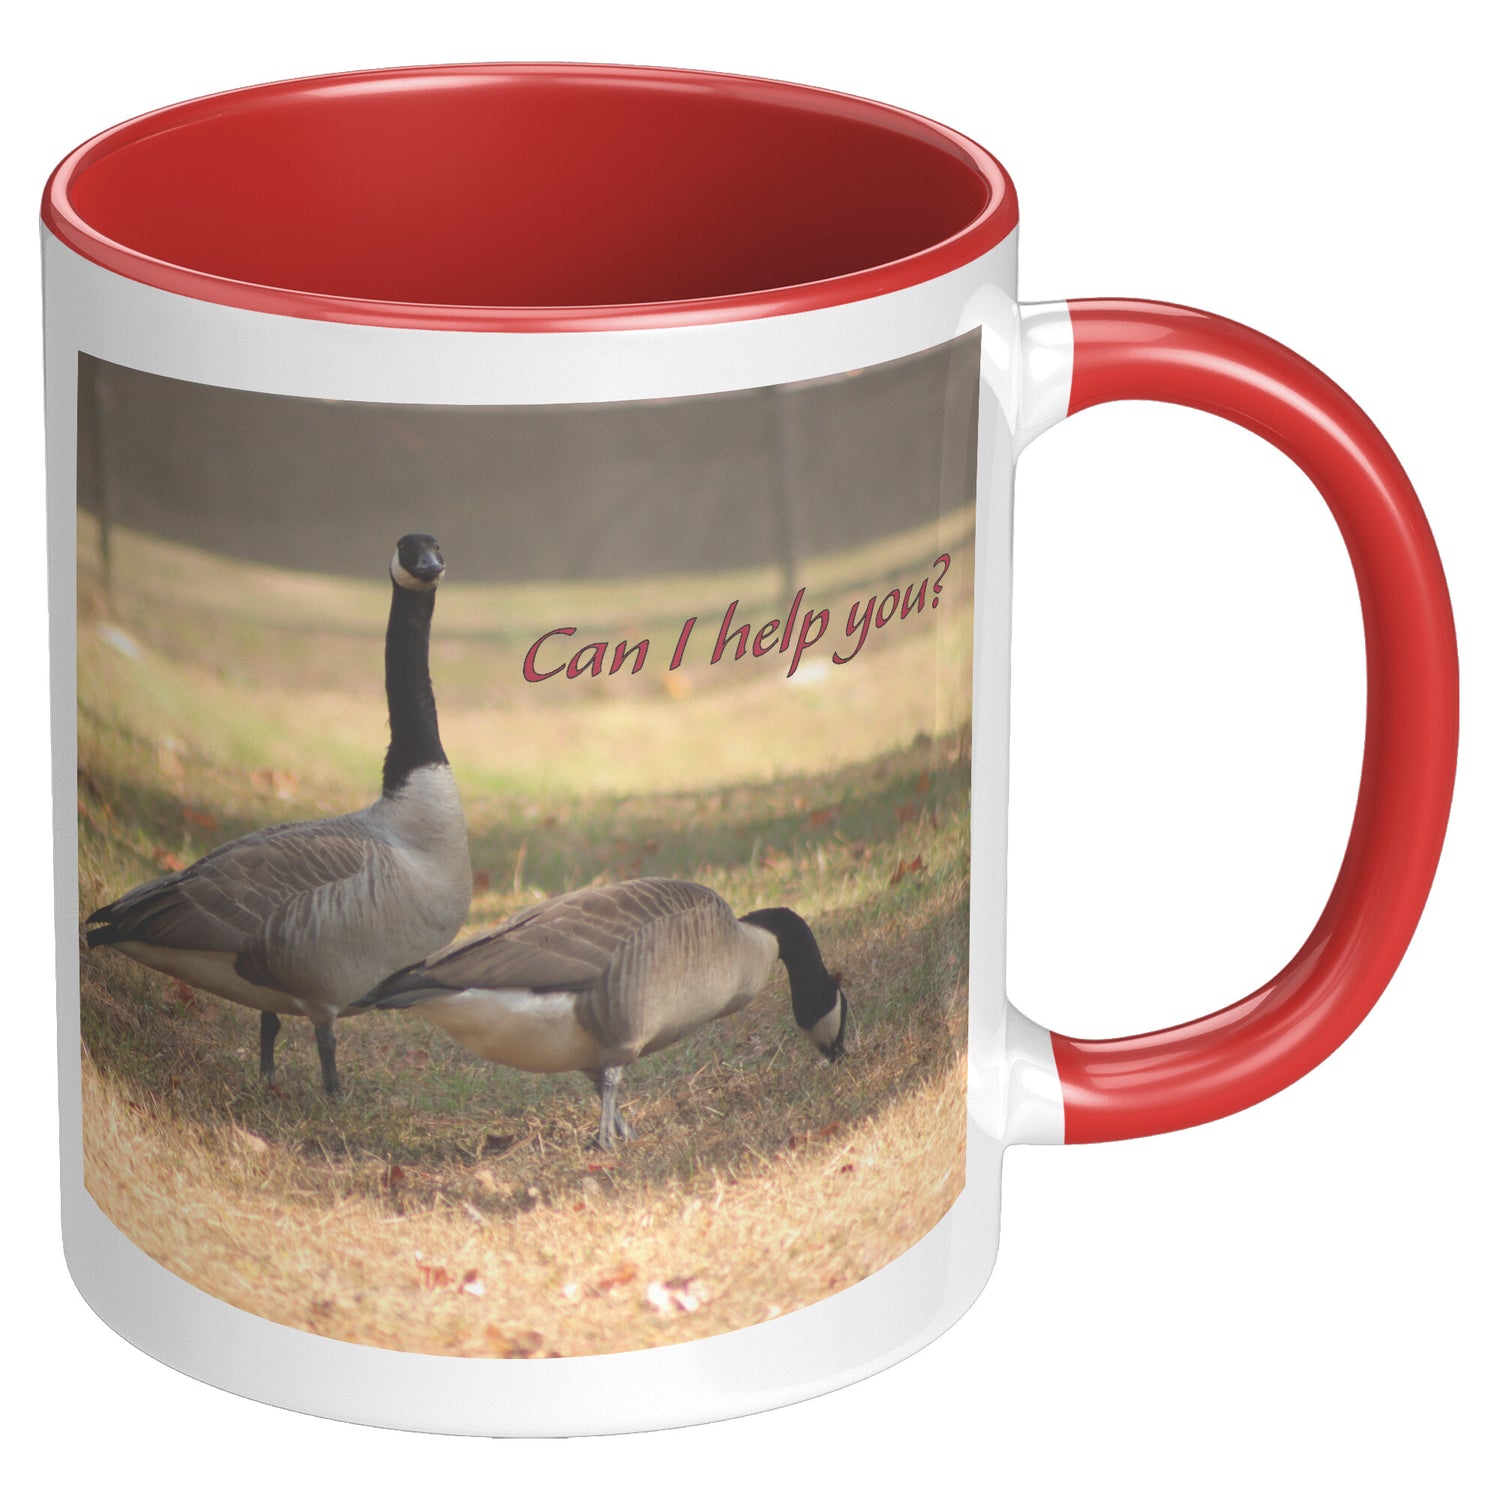 Can I help you? - 11 ounce Mug with Custom Lettering - Signs and Seasons Gifts